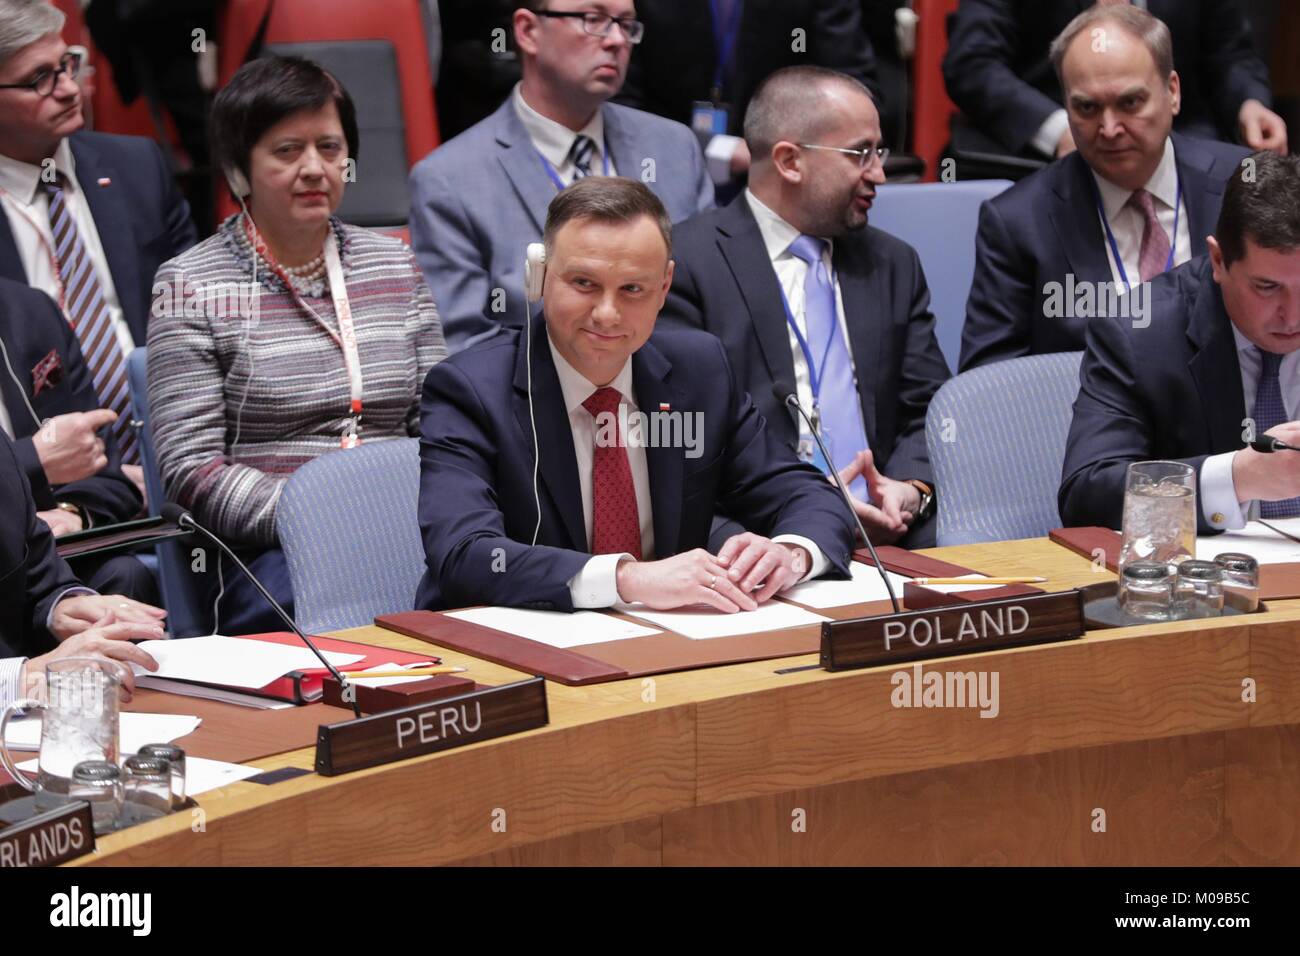 United Nations, New York, USA, January 18 2018 - Andrzej Duda, President of the Republic of Poland, During a Security Council meeting on Non-proliferation of Weapons of Mass Destruction today at the UN Headquarters in New York City. Photo: Luiz Rampelotto/EuropaNewswire *** Local Caption *** 00005848 | usage worldwide Stock Photo